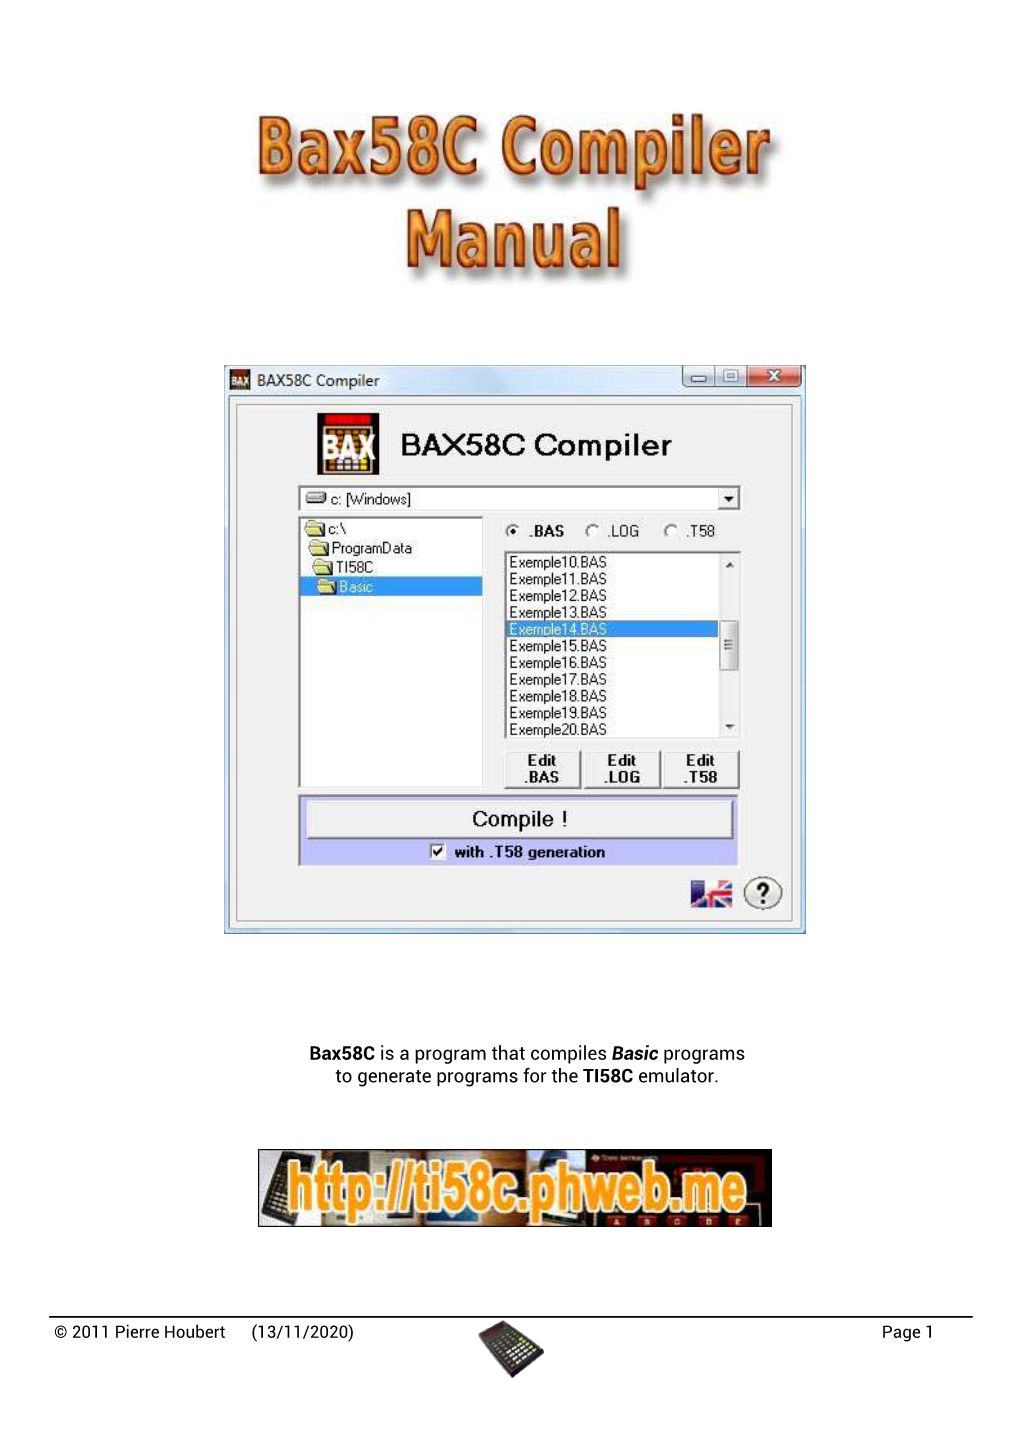 Bax58c Is a Program That Compiles Basic Programs to Generate Programs for the TI58C Emulator